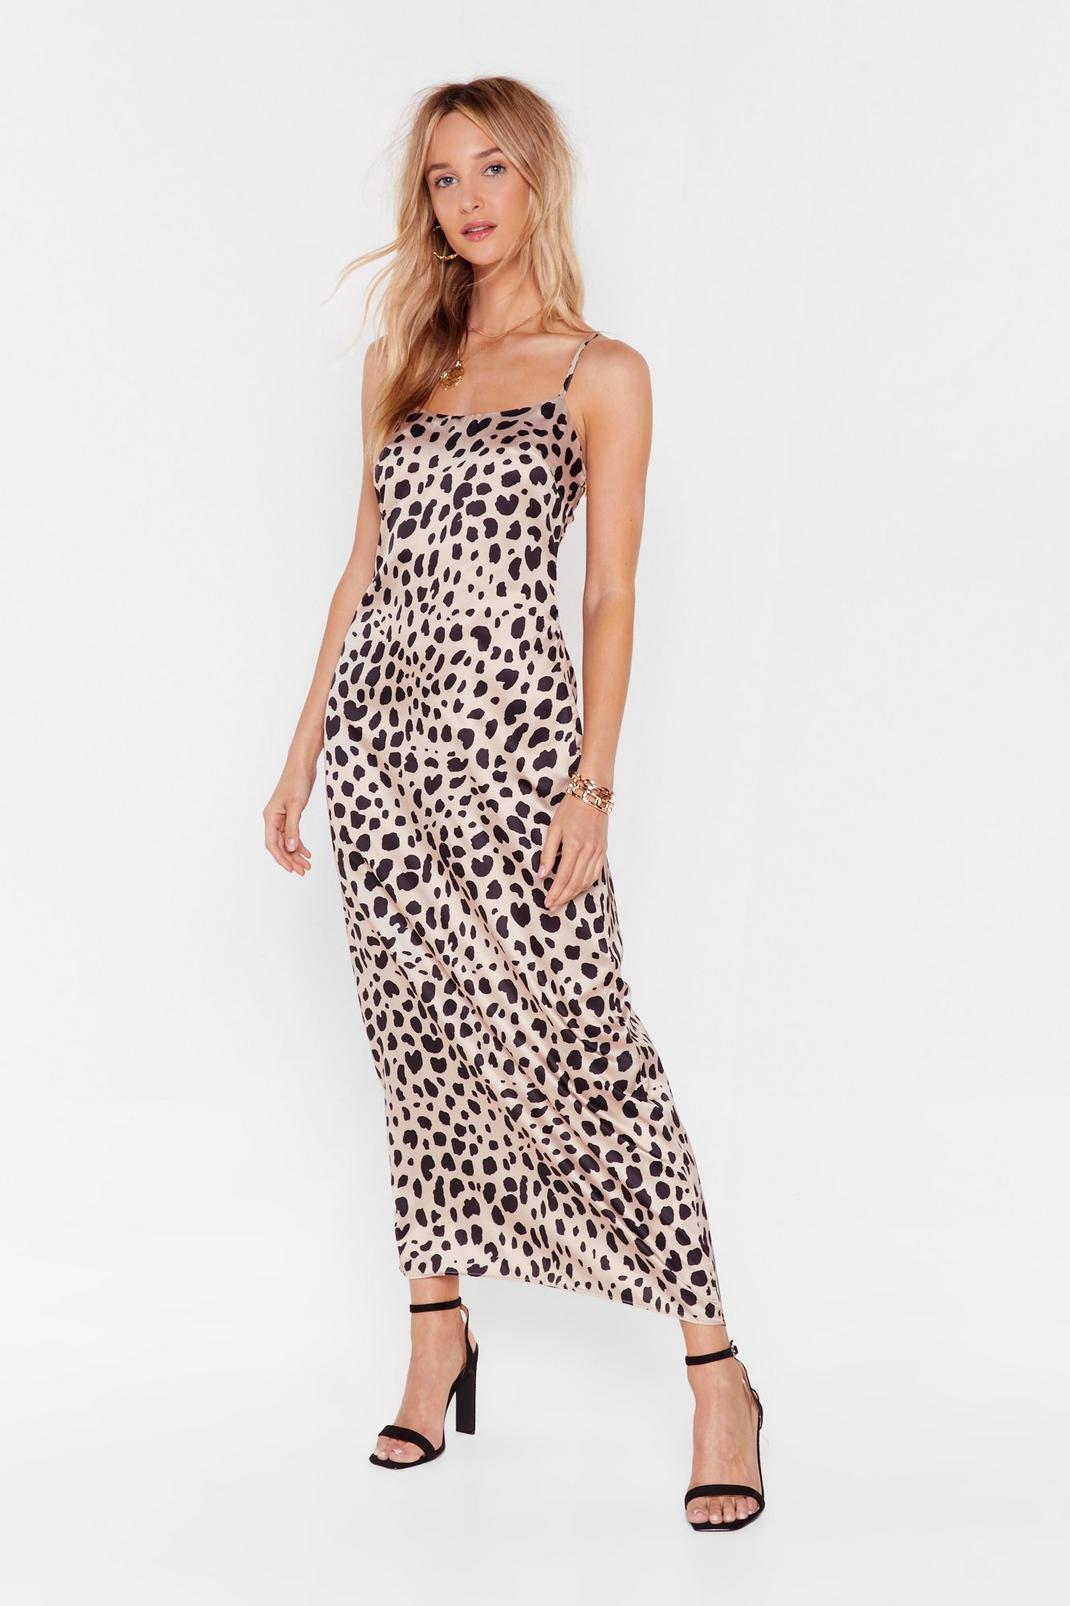 Champagne Paws and Reflect Dalmatian Slip Dress image number 1